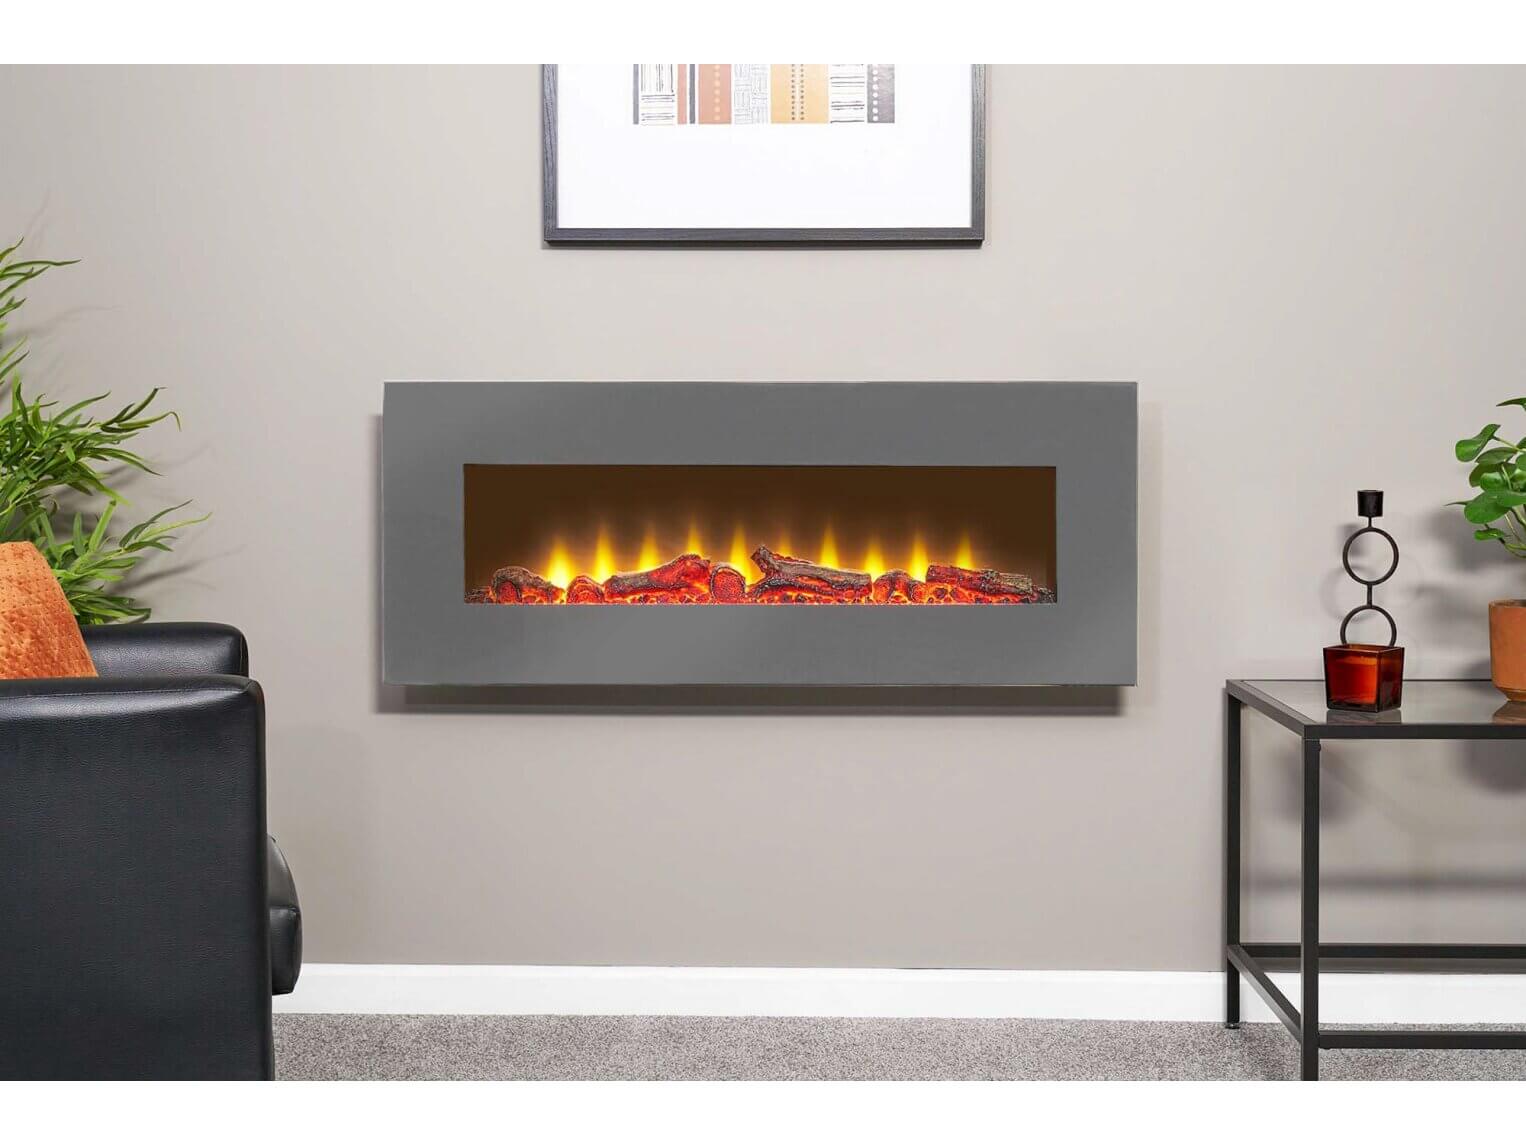 Sureflame WM-9505 Electric Wall Mounted Fire with Remote in Grey, 42 Inch - Glowing Flames